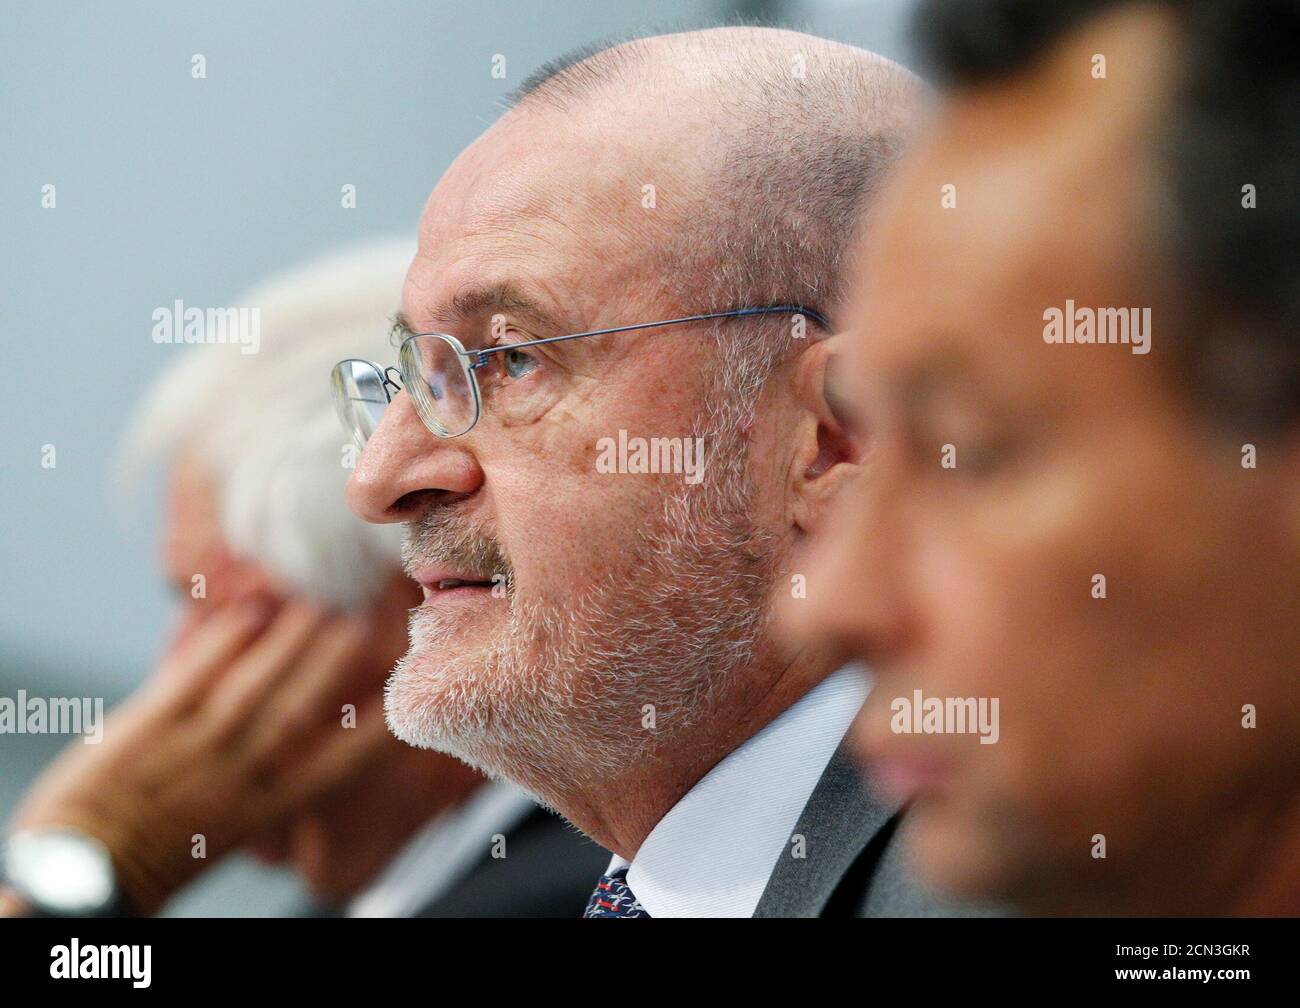 Switzerland's Liberal Free Democratic Party (FDP) President Fulvio Pelli (C) speaks next to Councillor of State Rolf Schweiger (L) and National Councillor Philipp Mueller during a news conference in Bern August 17, 2010. REUTERS/Pascal Lauener (SWITZERLAND - Tags: POLITICS) Stock Photo